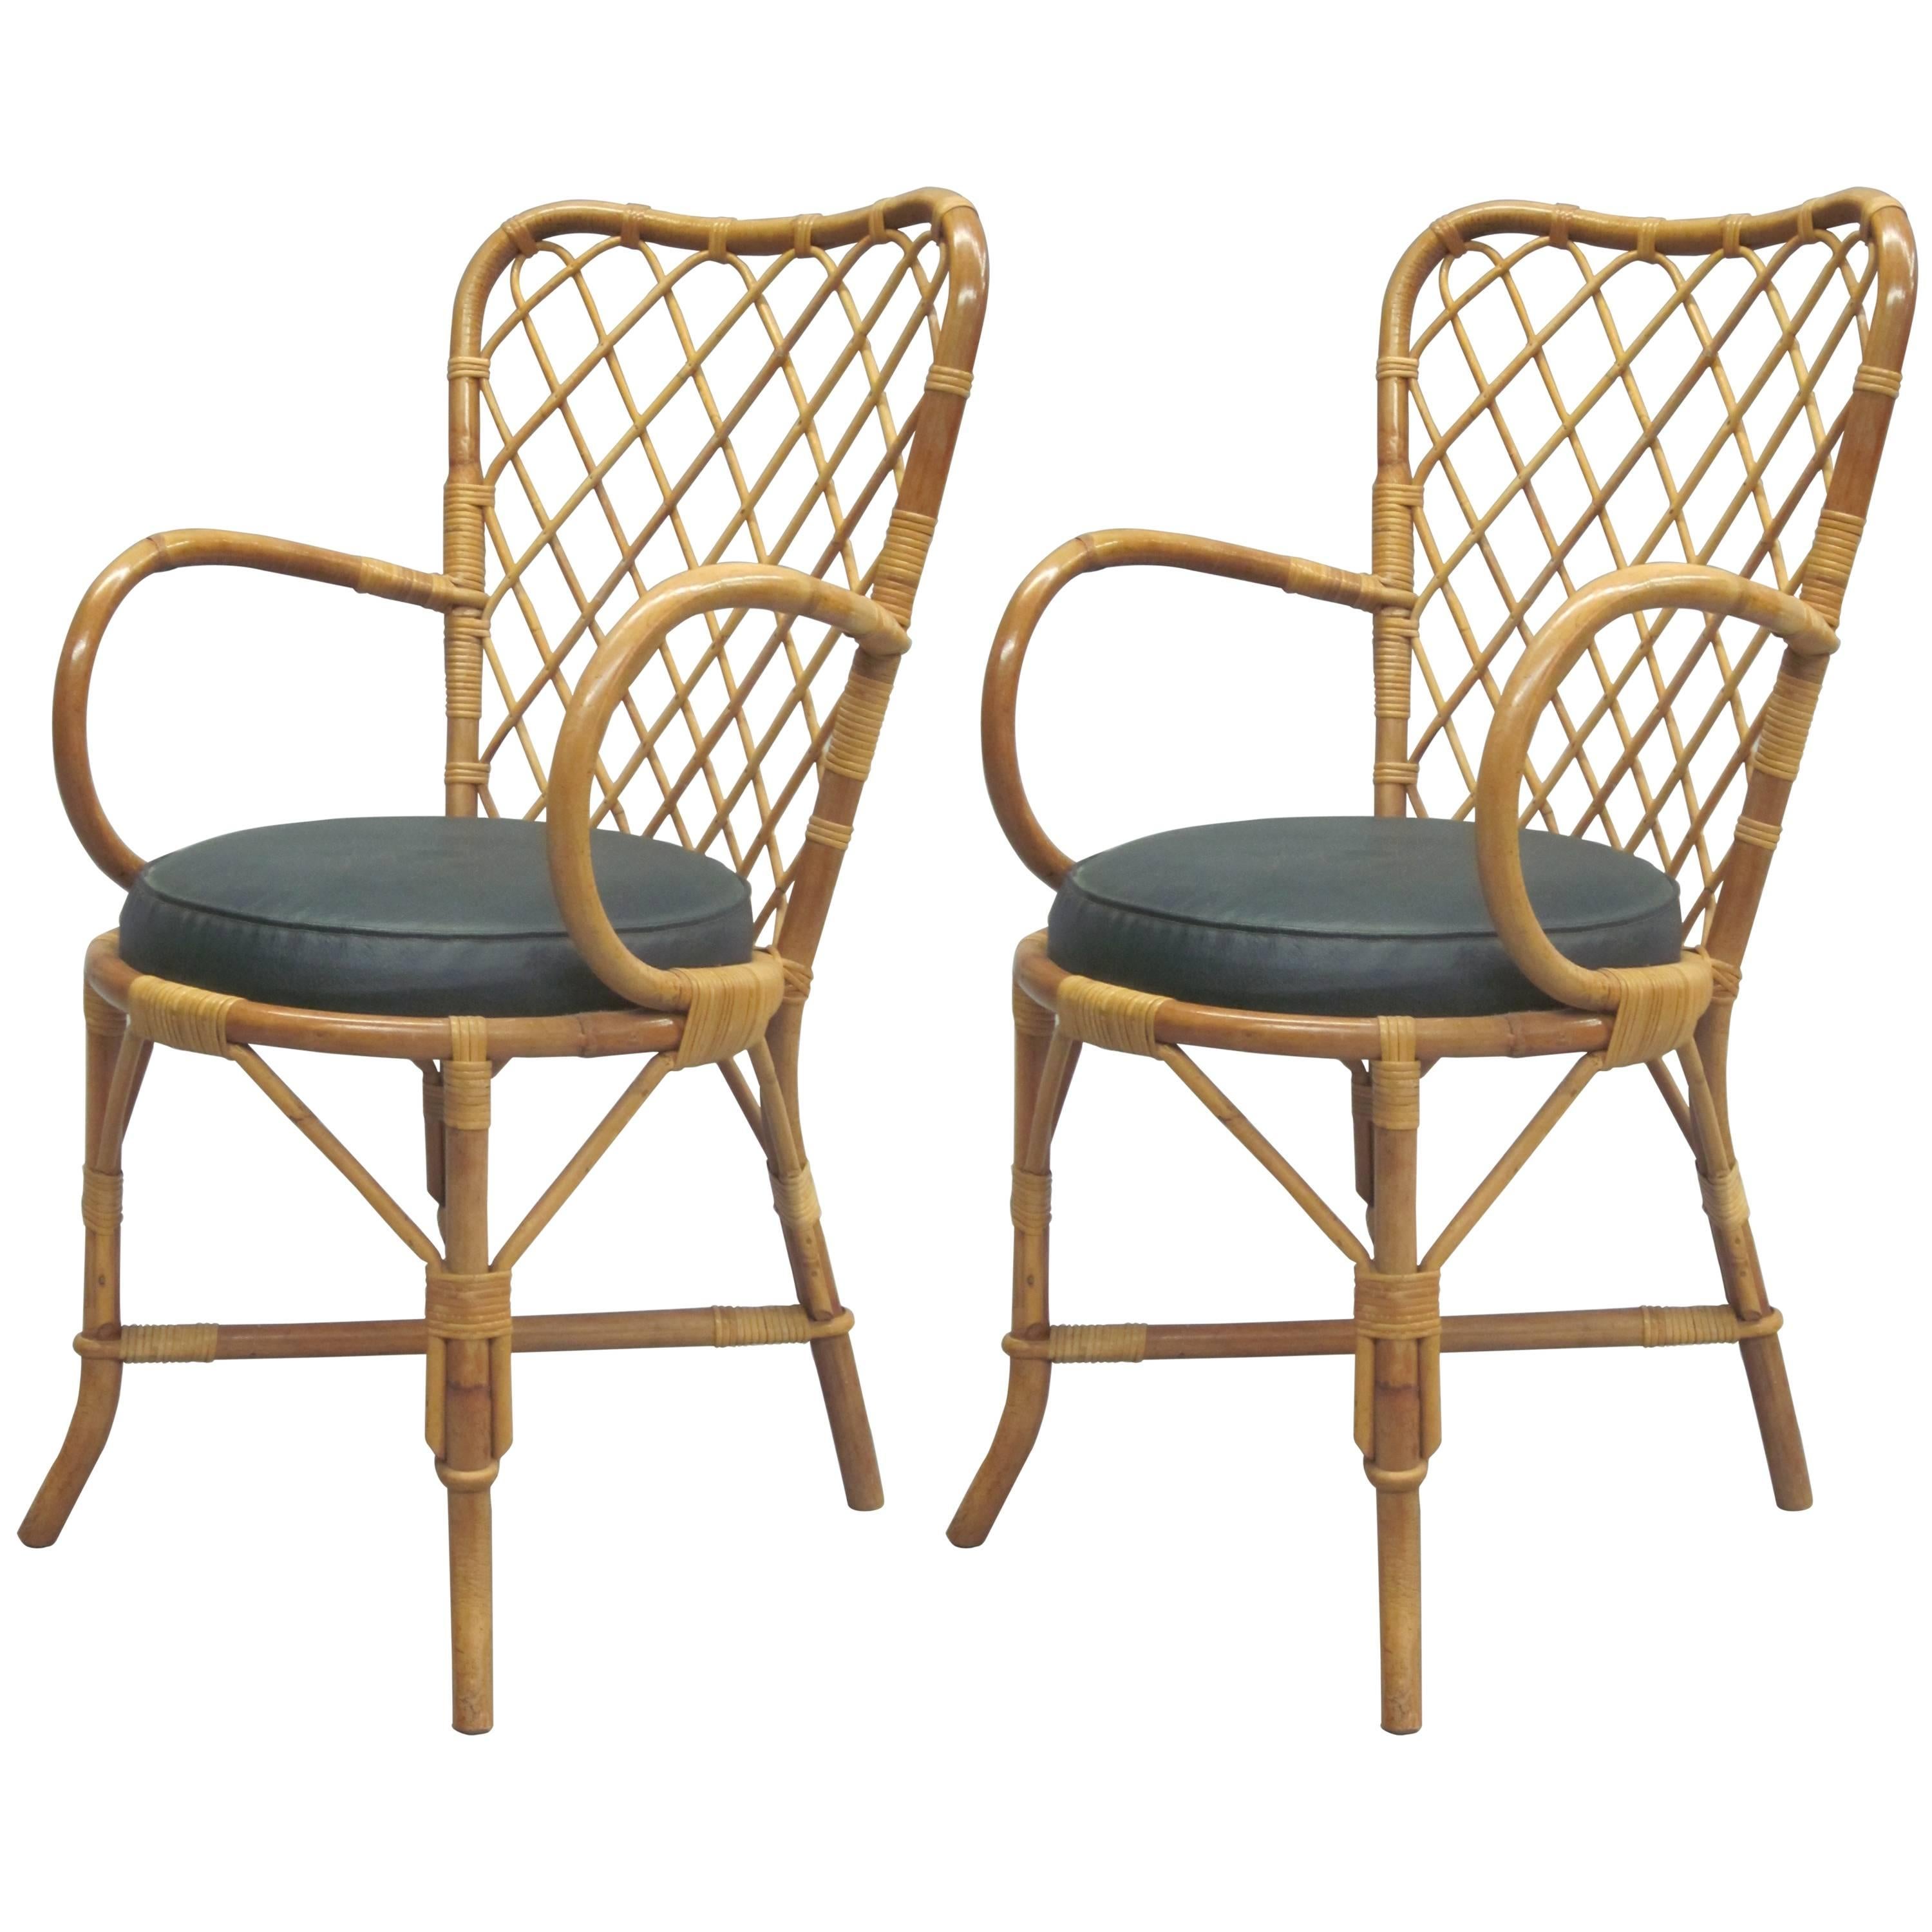 Two French Mid-Century Modern Rattan Side or Desk Chairs Attrib. to Jean Royère